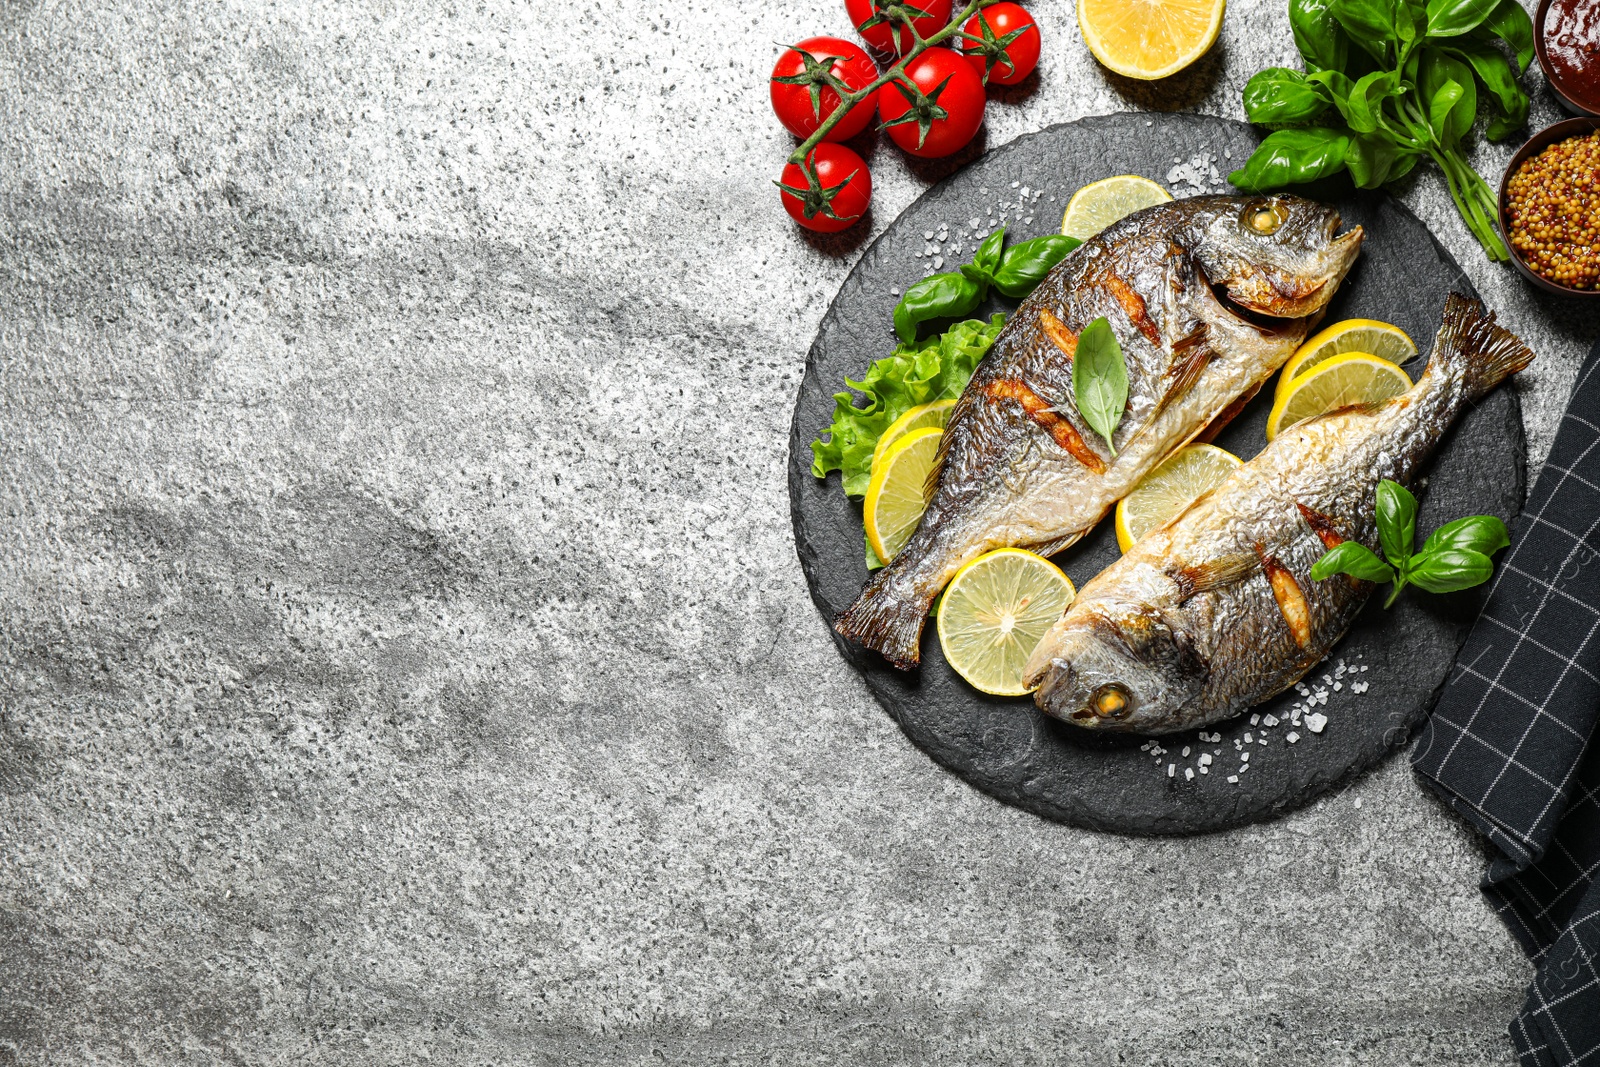 Photo of Delicious roasted fish with lemon on grey table, flat lay. Space for text